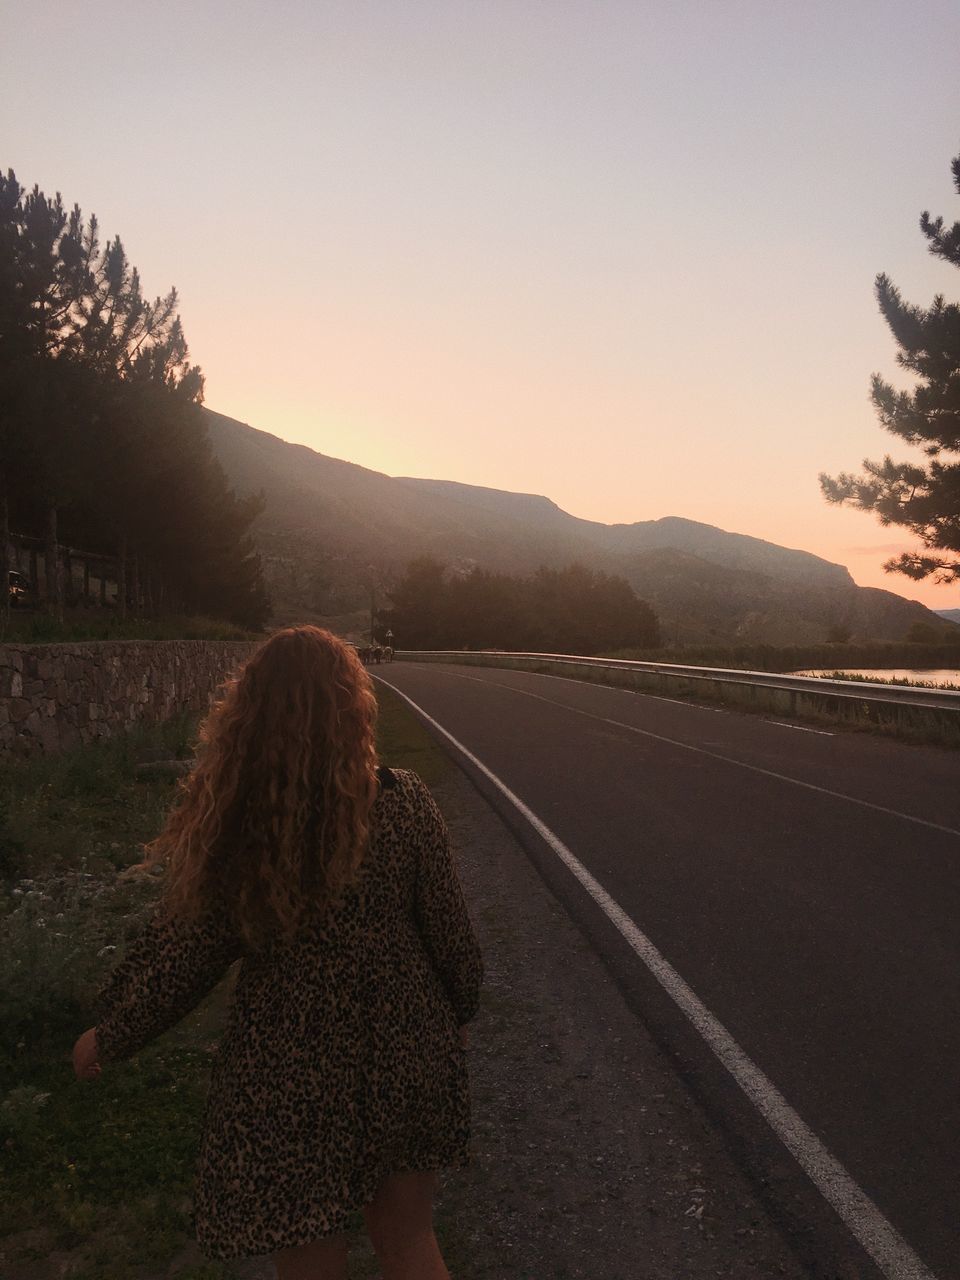 REAR VIEW OF WOMAN STANDING BY ROAD AGAINST SKY DURING SUNSET